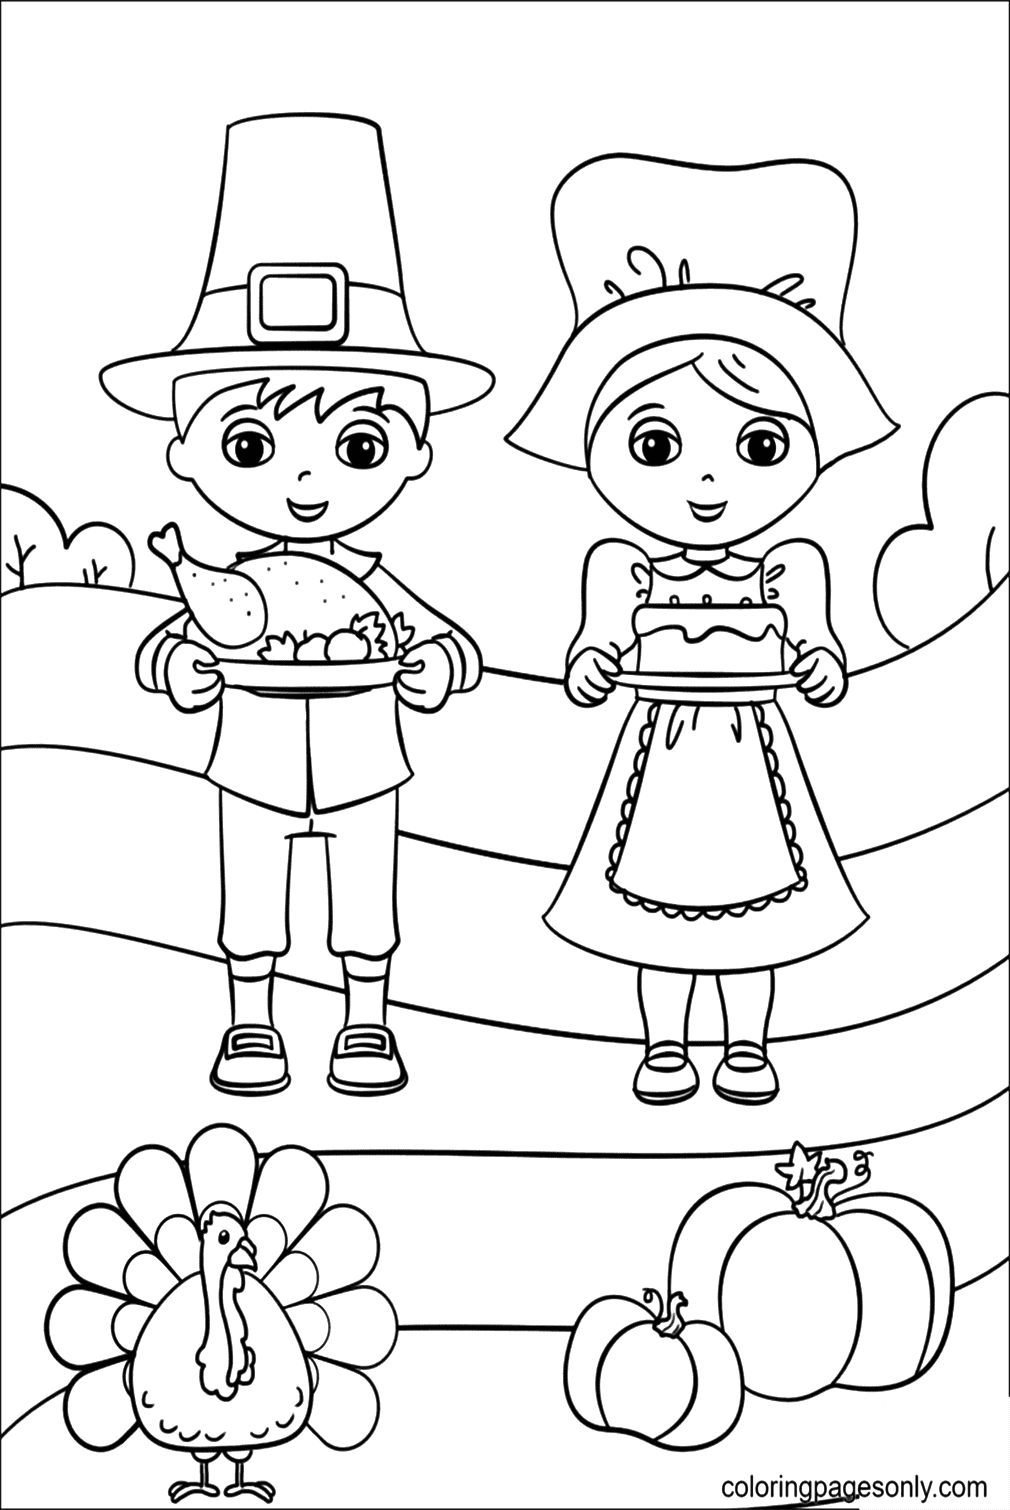 Cute Pilgrim Boy And Girl Coloring Pages